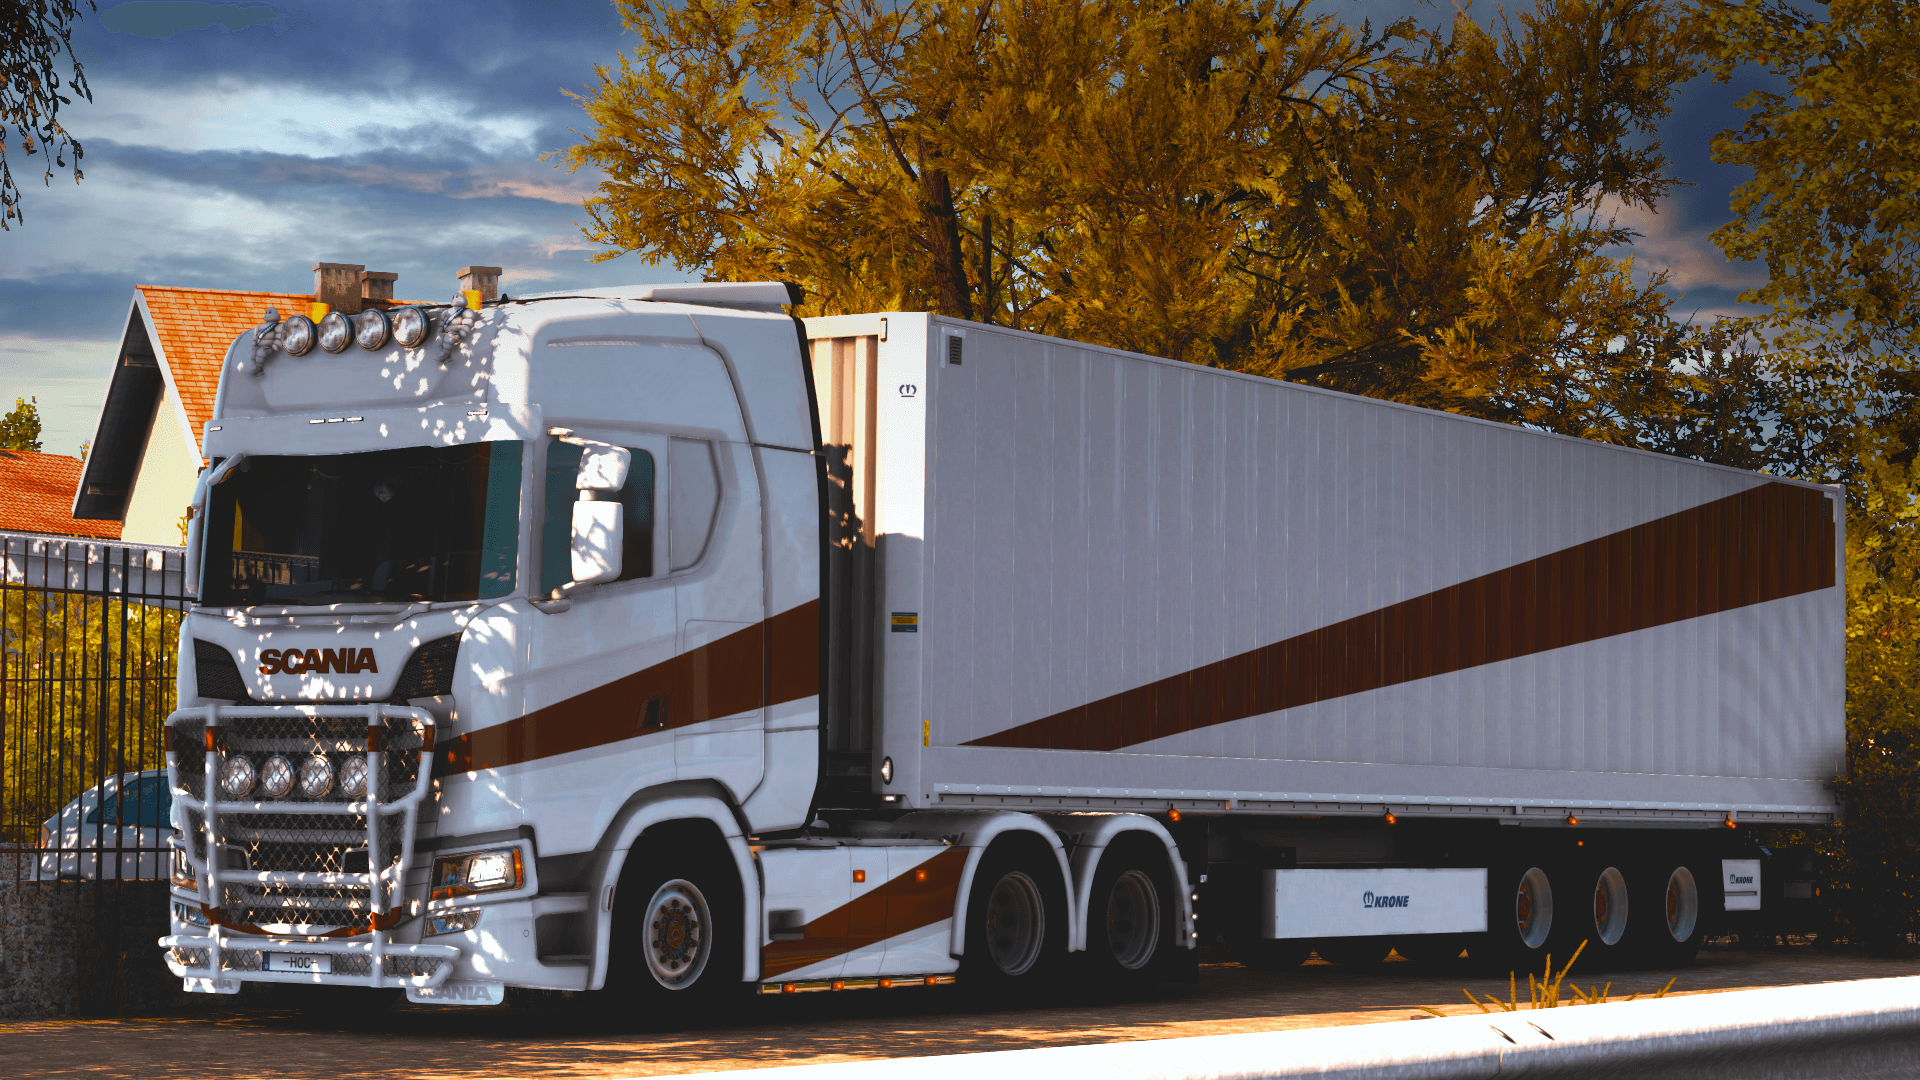 GPE truck parked on the side of the road in the autumn with orange trees all around, truck has the gold and white paint job